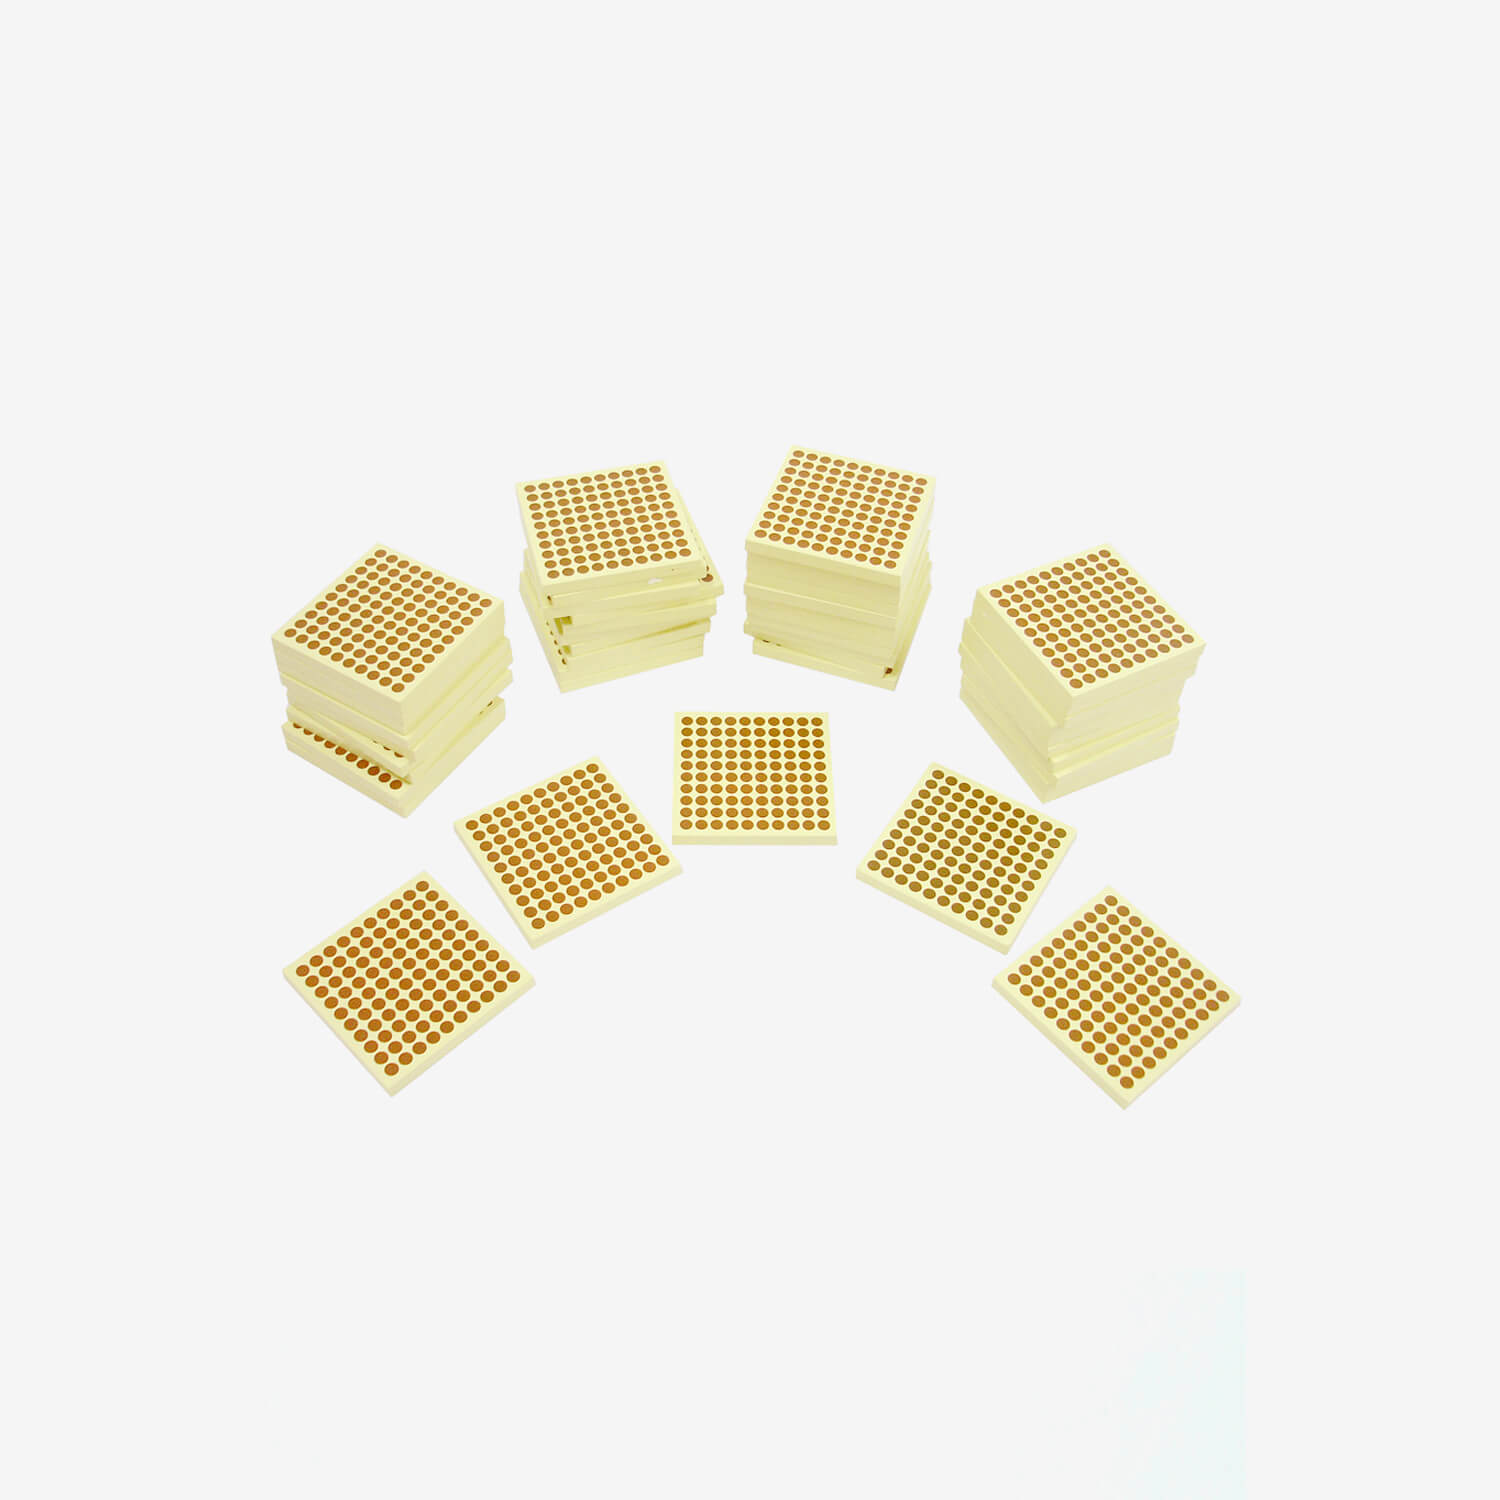 Wooden Square Of 100: Set Of 45